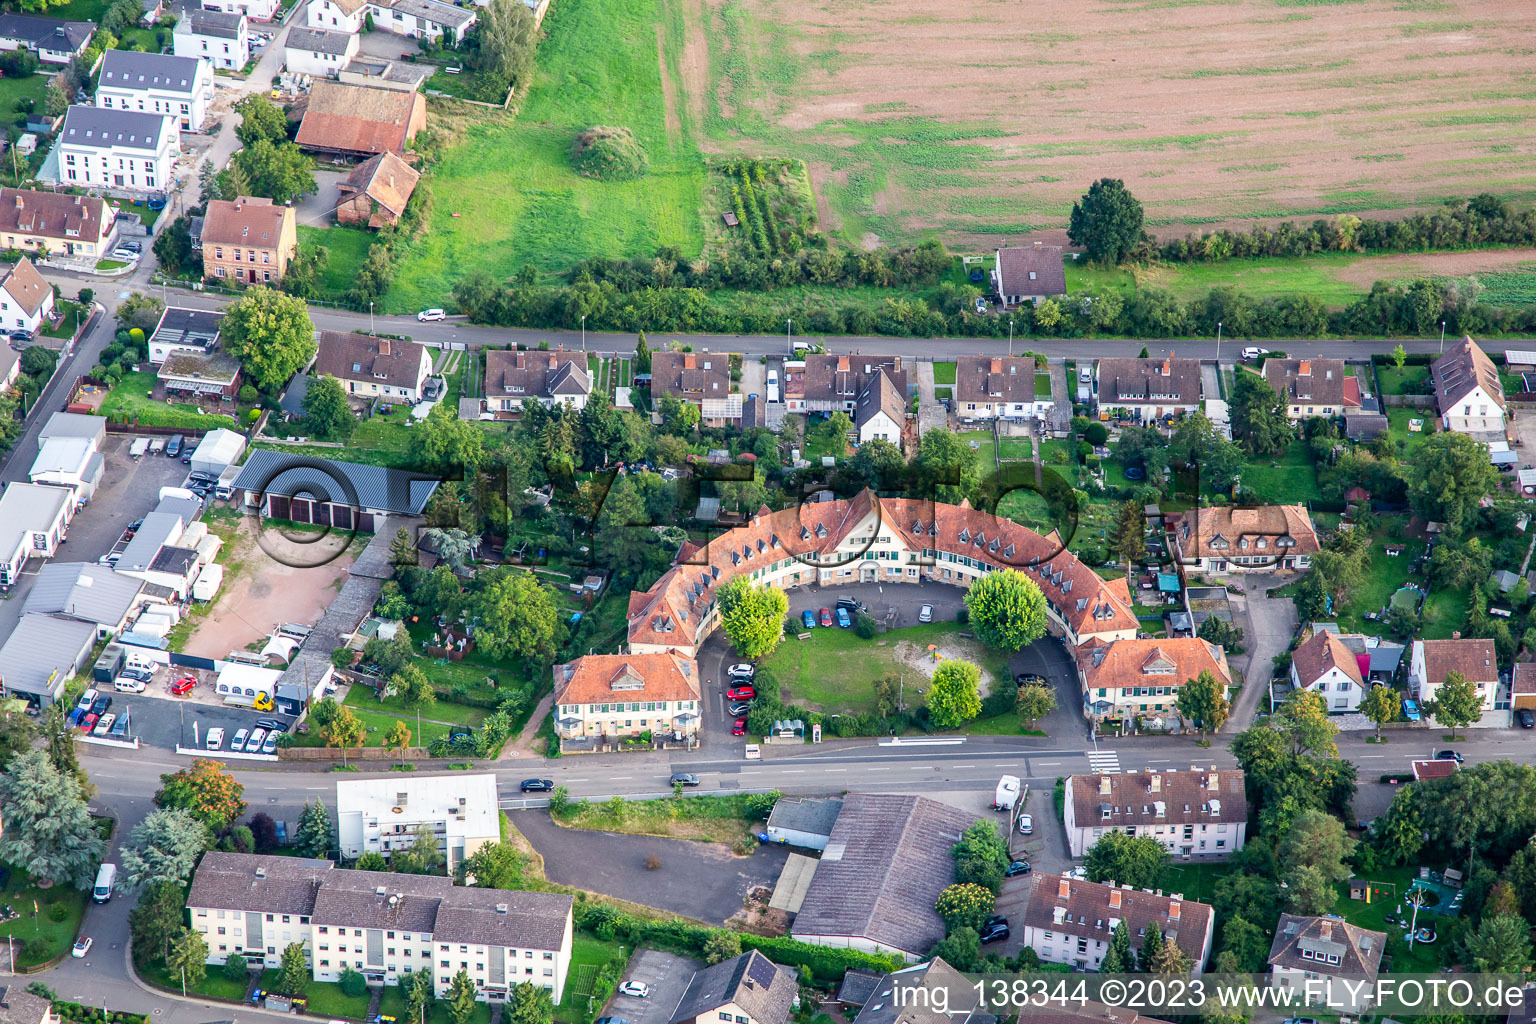 Aerial photograpy of Rondell residential complex on Rüdesheimer Straße in Bad Kreuznach in the state Rhineland-Palatinate, Germany